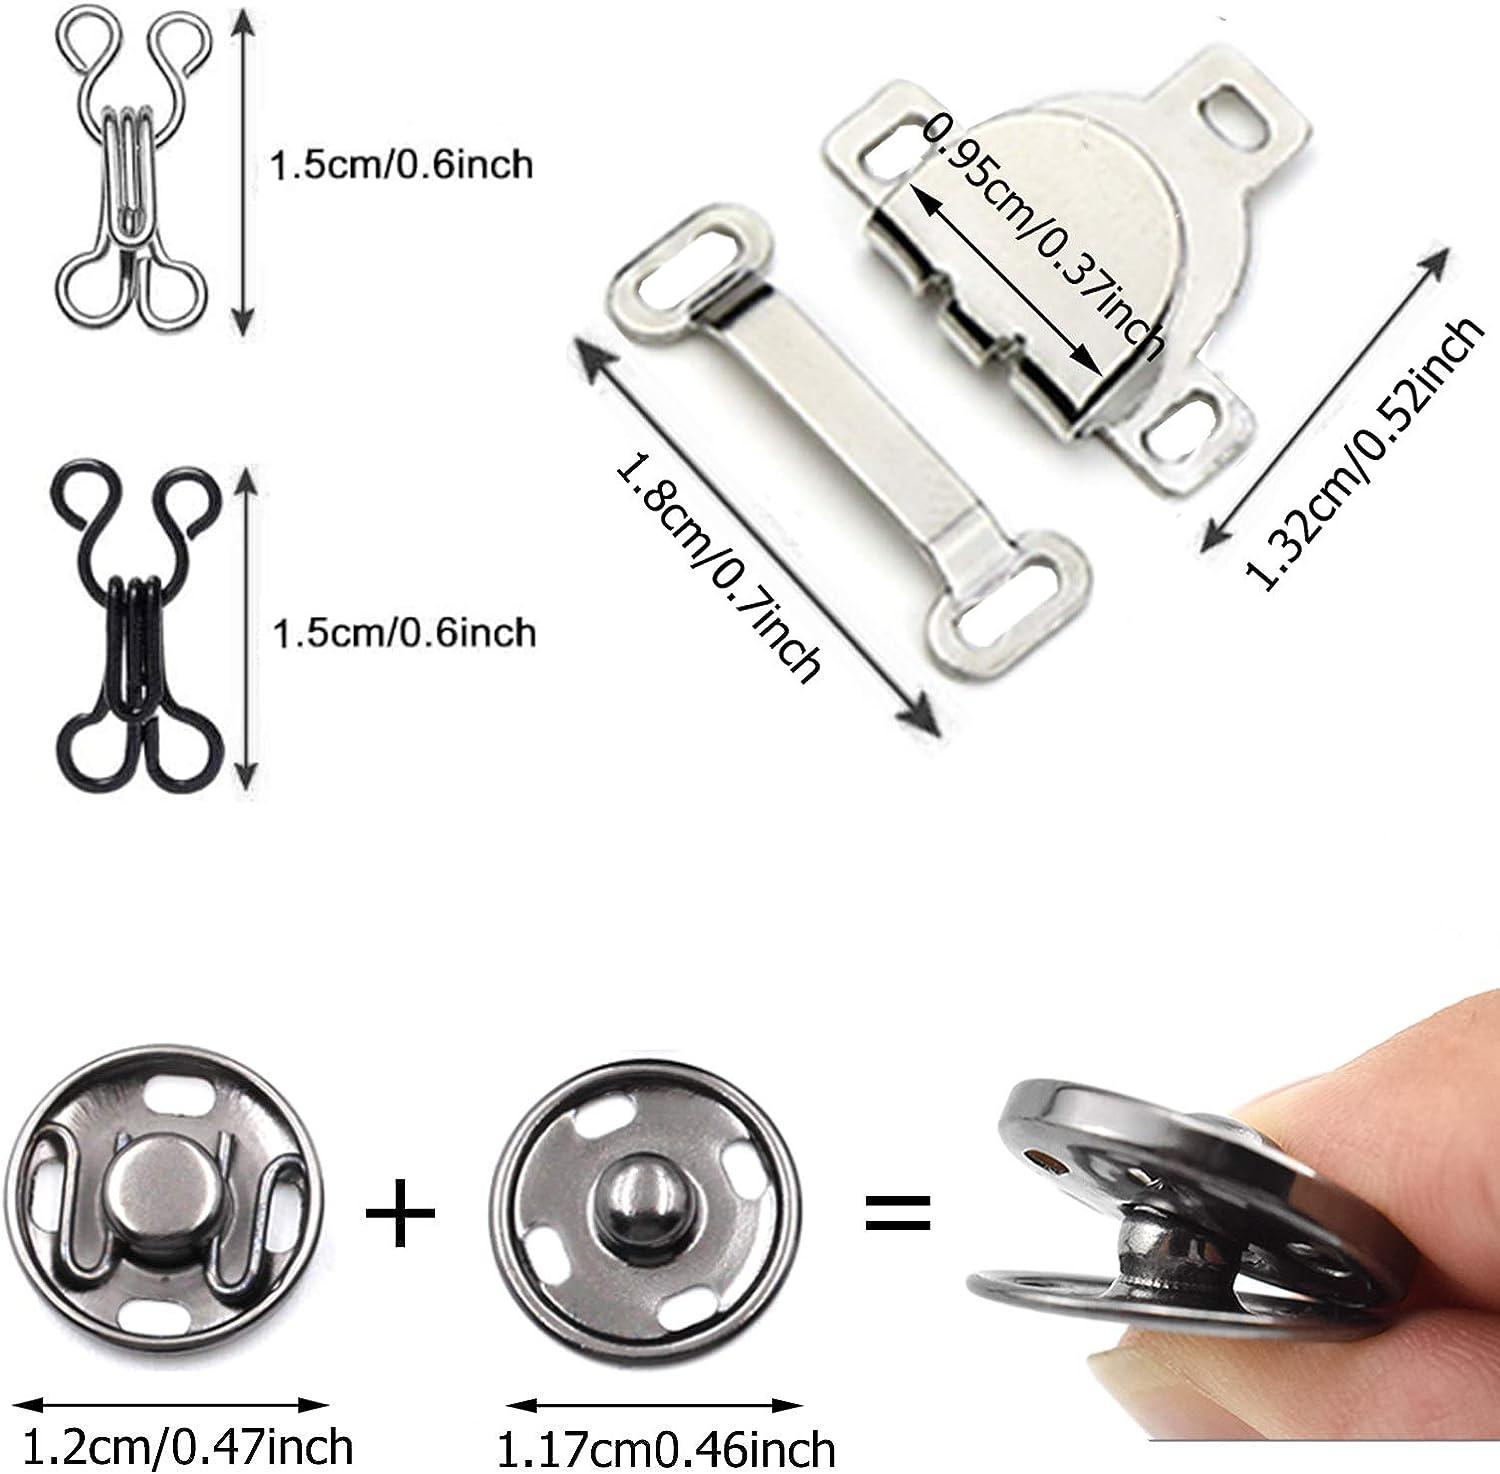 Sew-on Snap Press Button Sewing Hook and Eye Closure for Skirt